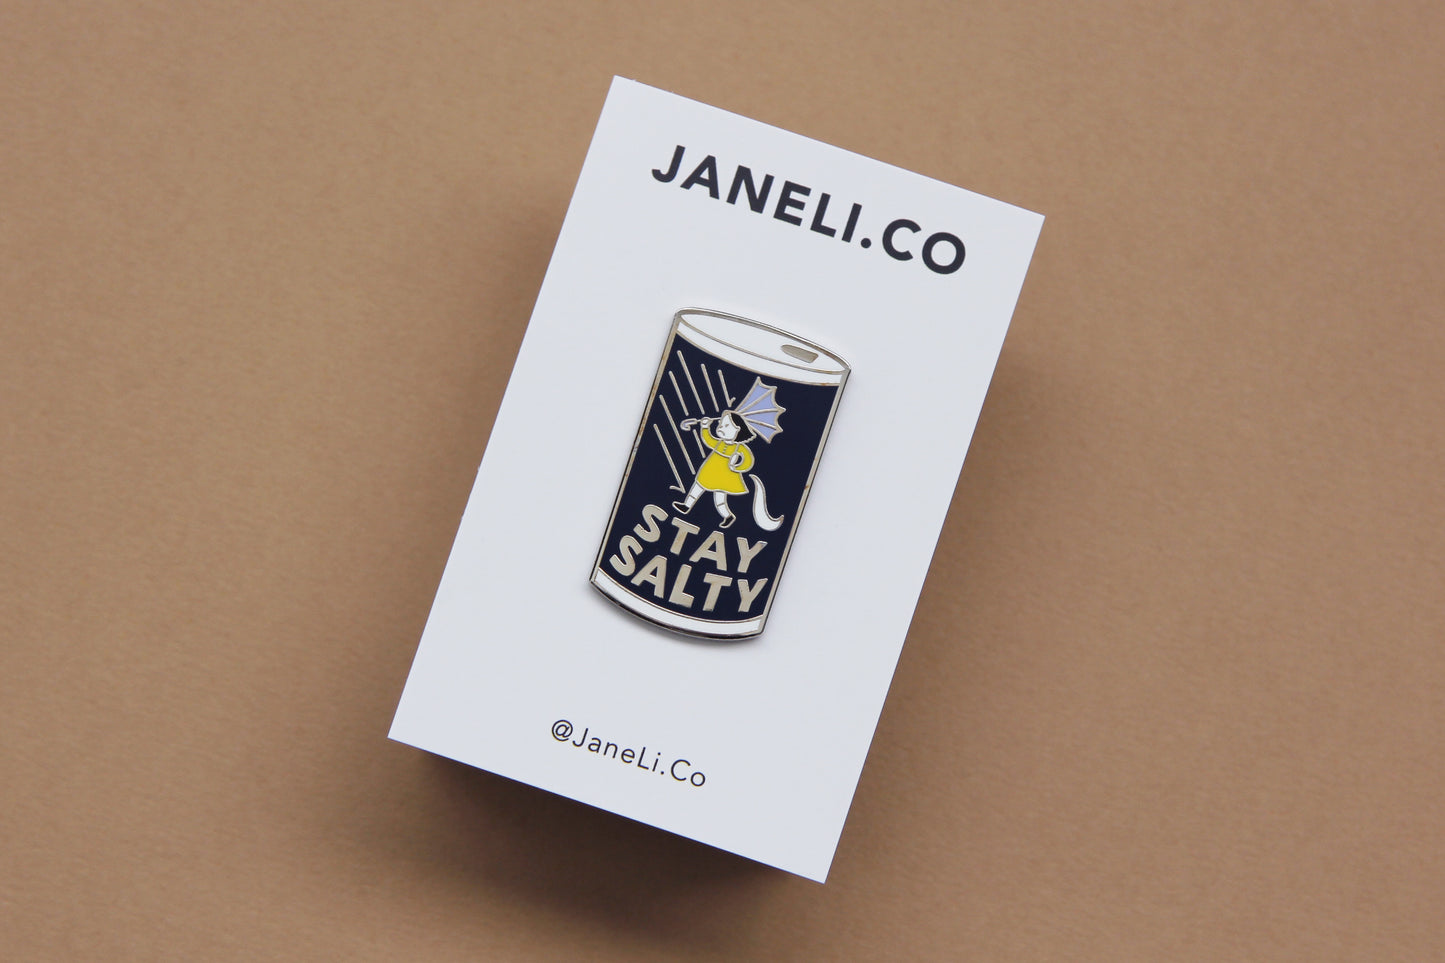 An enamel pin showing a grumpy girl on a salt can that says "Stay Salty" on a white JaneLi.Co backing card over a tan background.